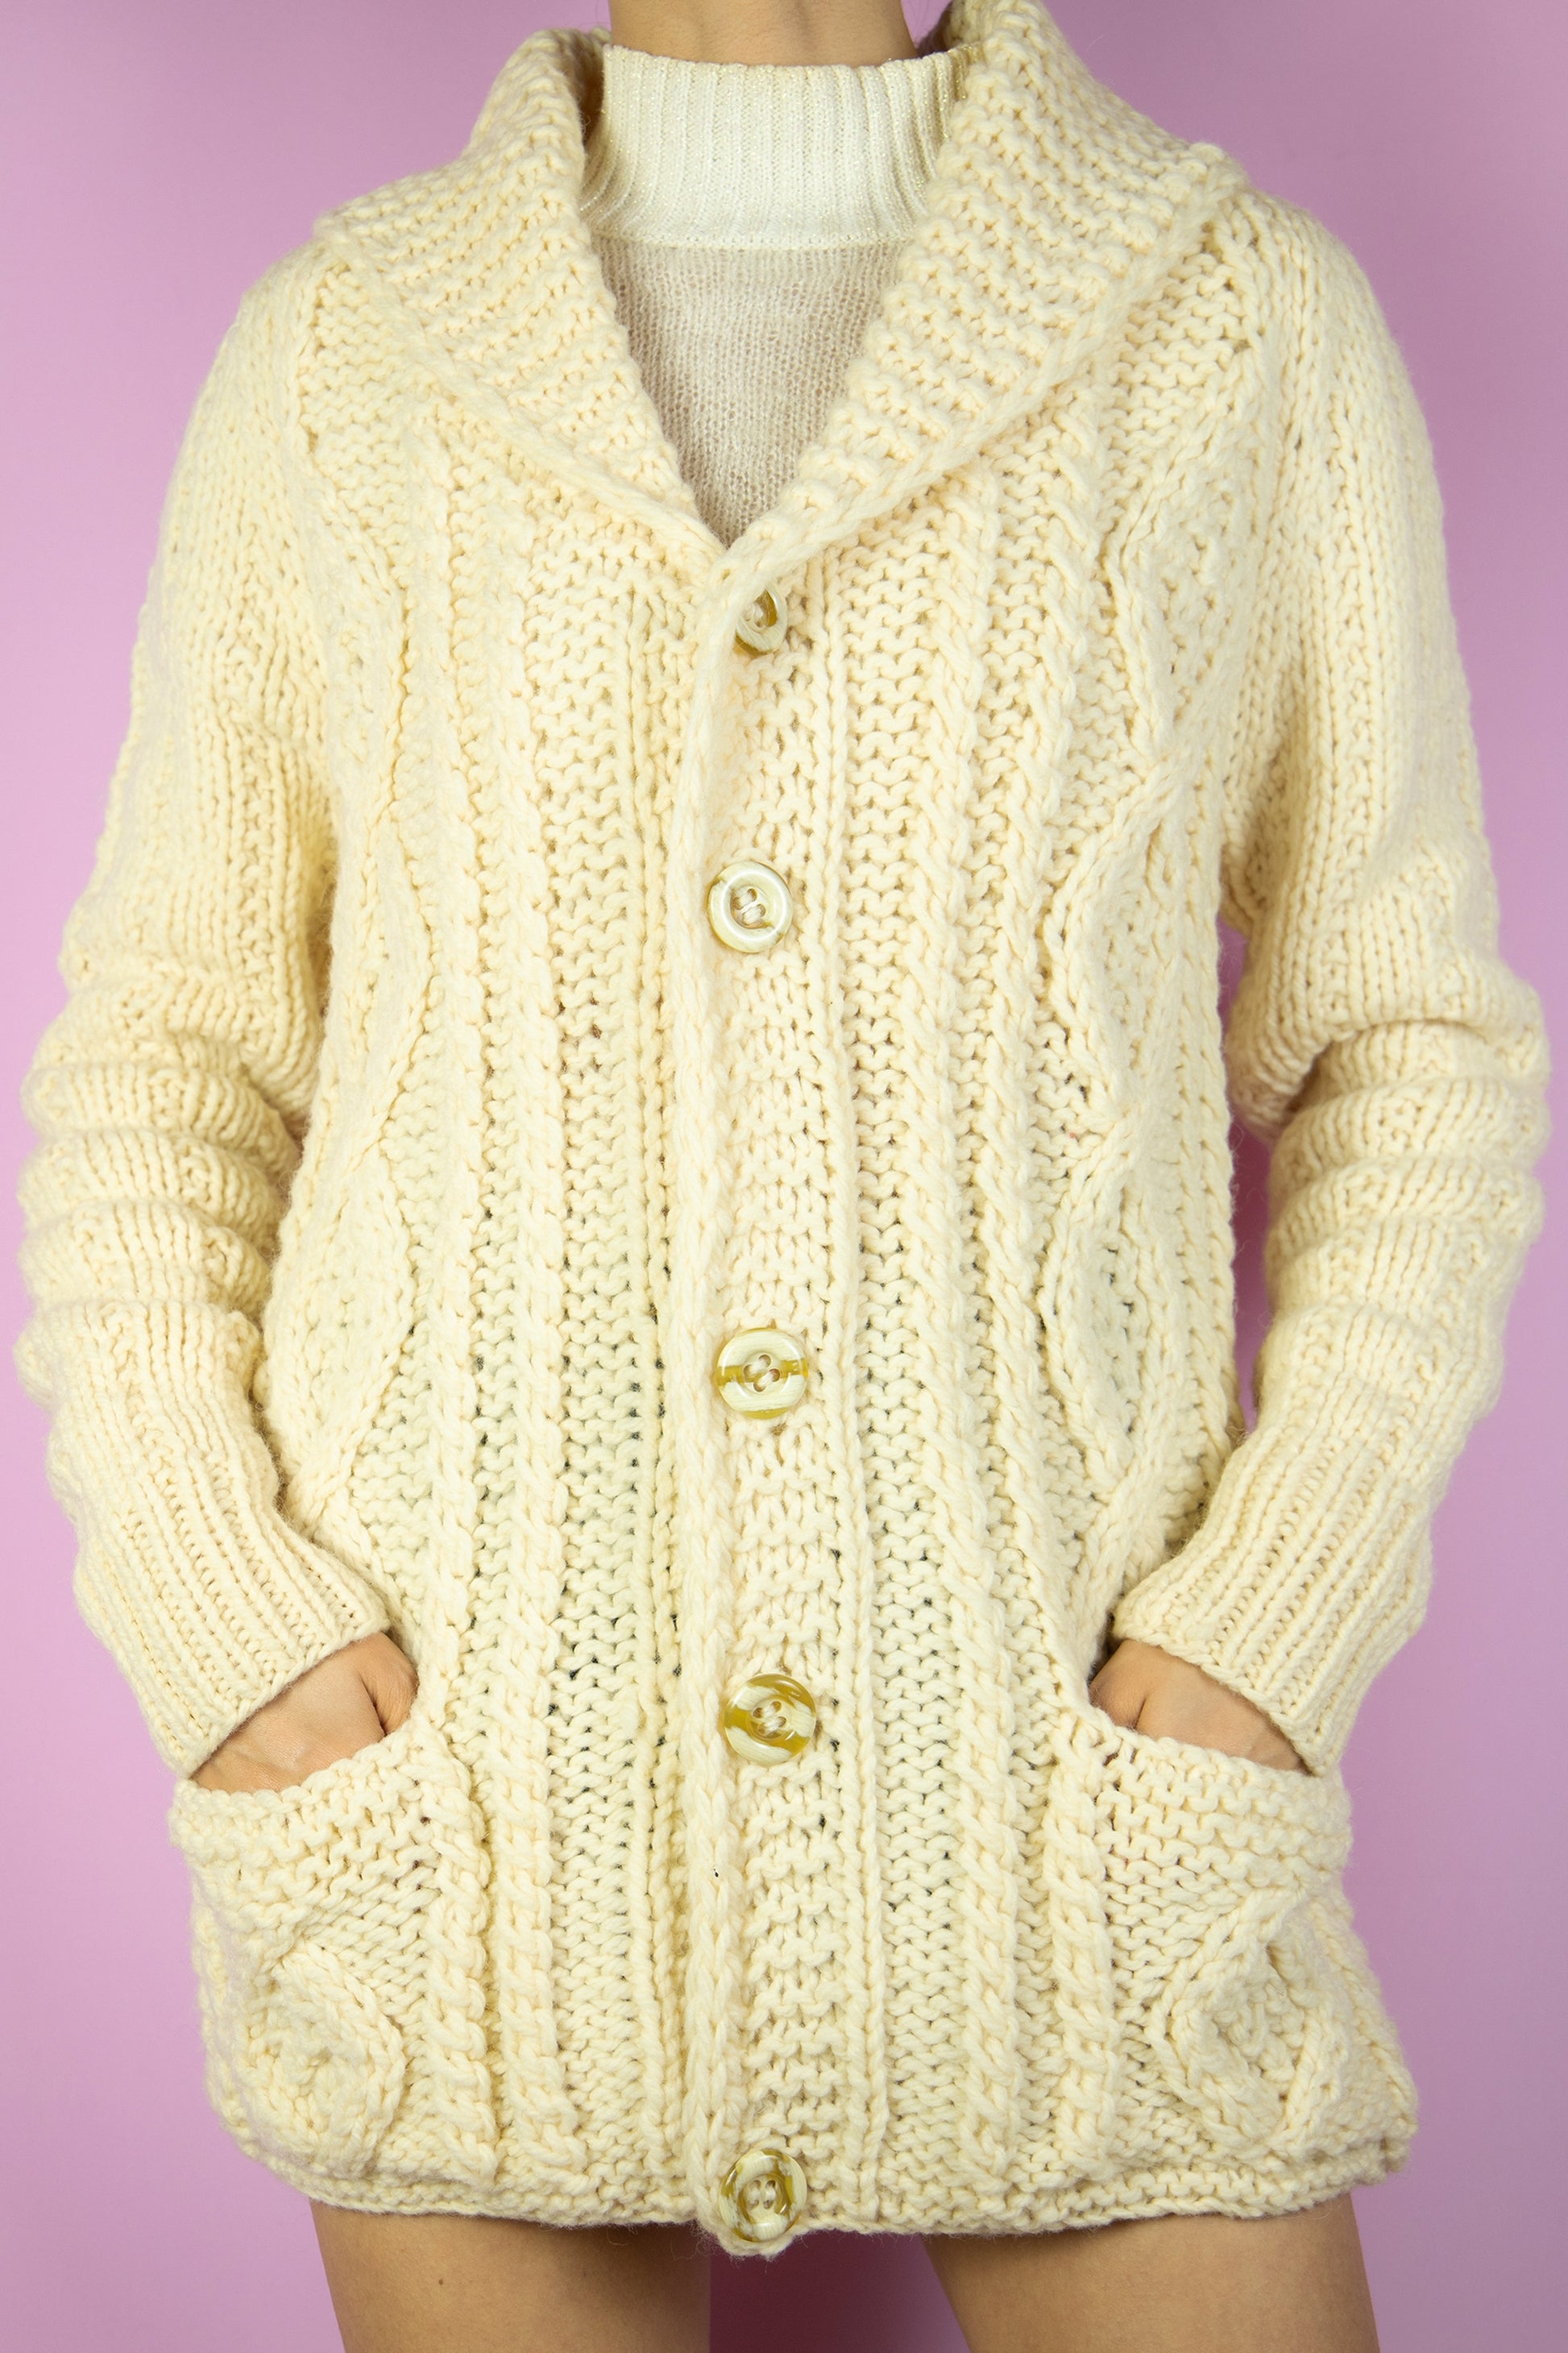 The Vintage 90s Beige Wool Knit Cardigan is a cream chunky hand knit wool cardigan with buttons and pockets. Boho retro 1990s winter sweater.